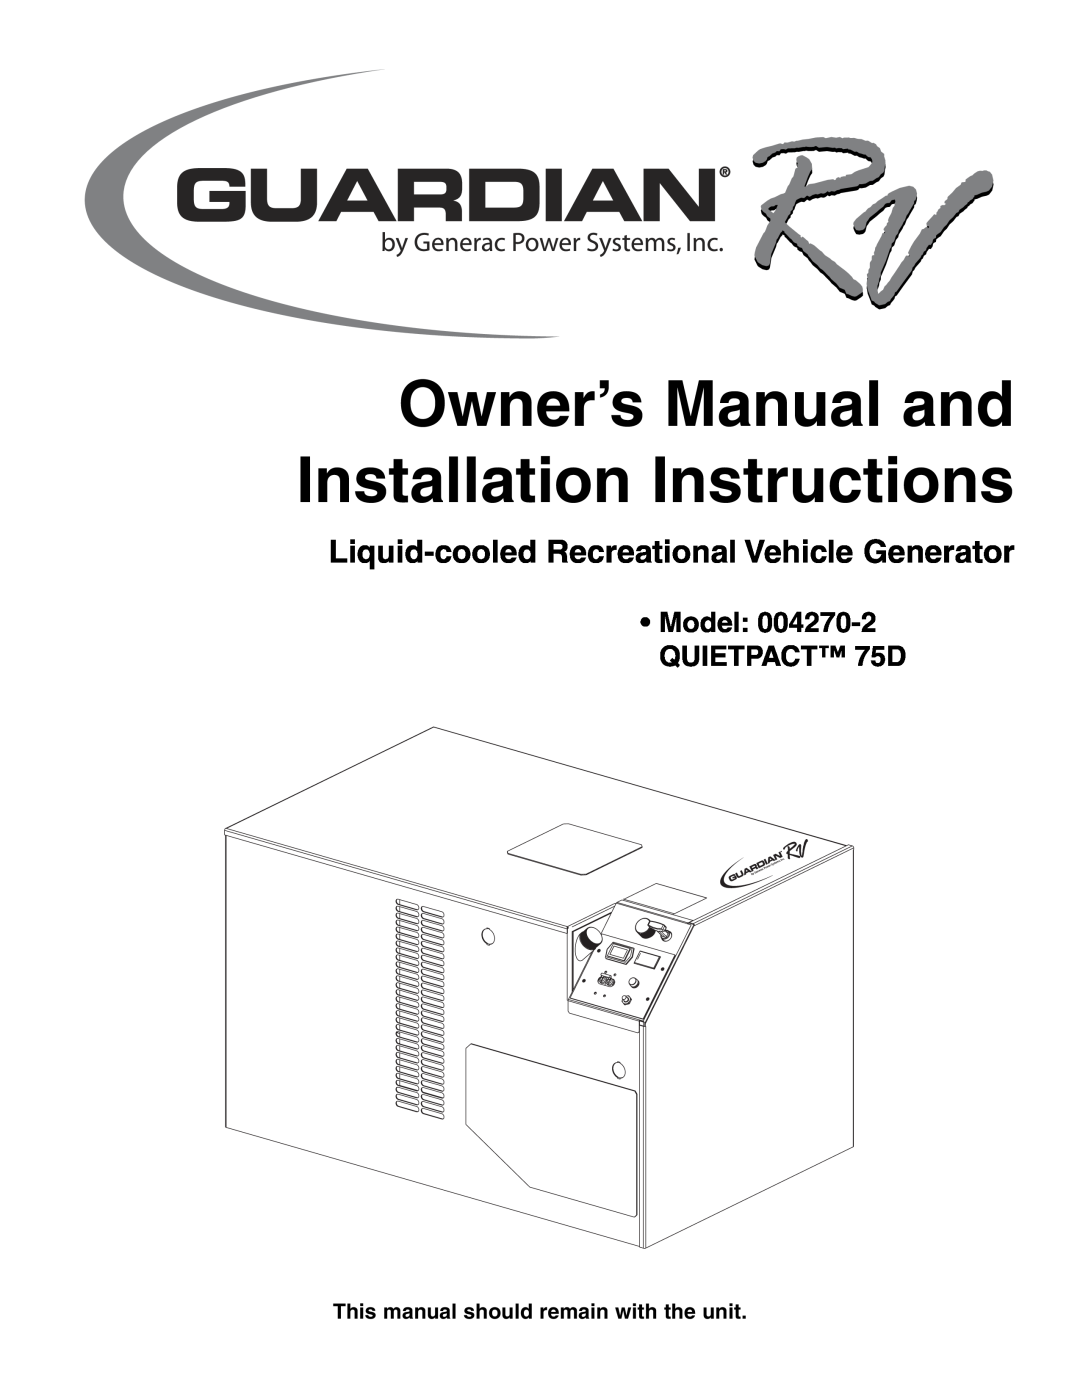 Guardian Technologies owner manual Owner’s Manual and Installation Instructions, Model 004270-2 QUIETPACT 75D 